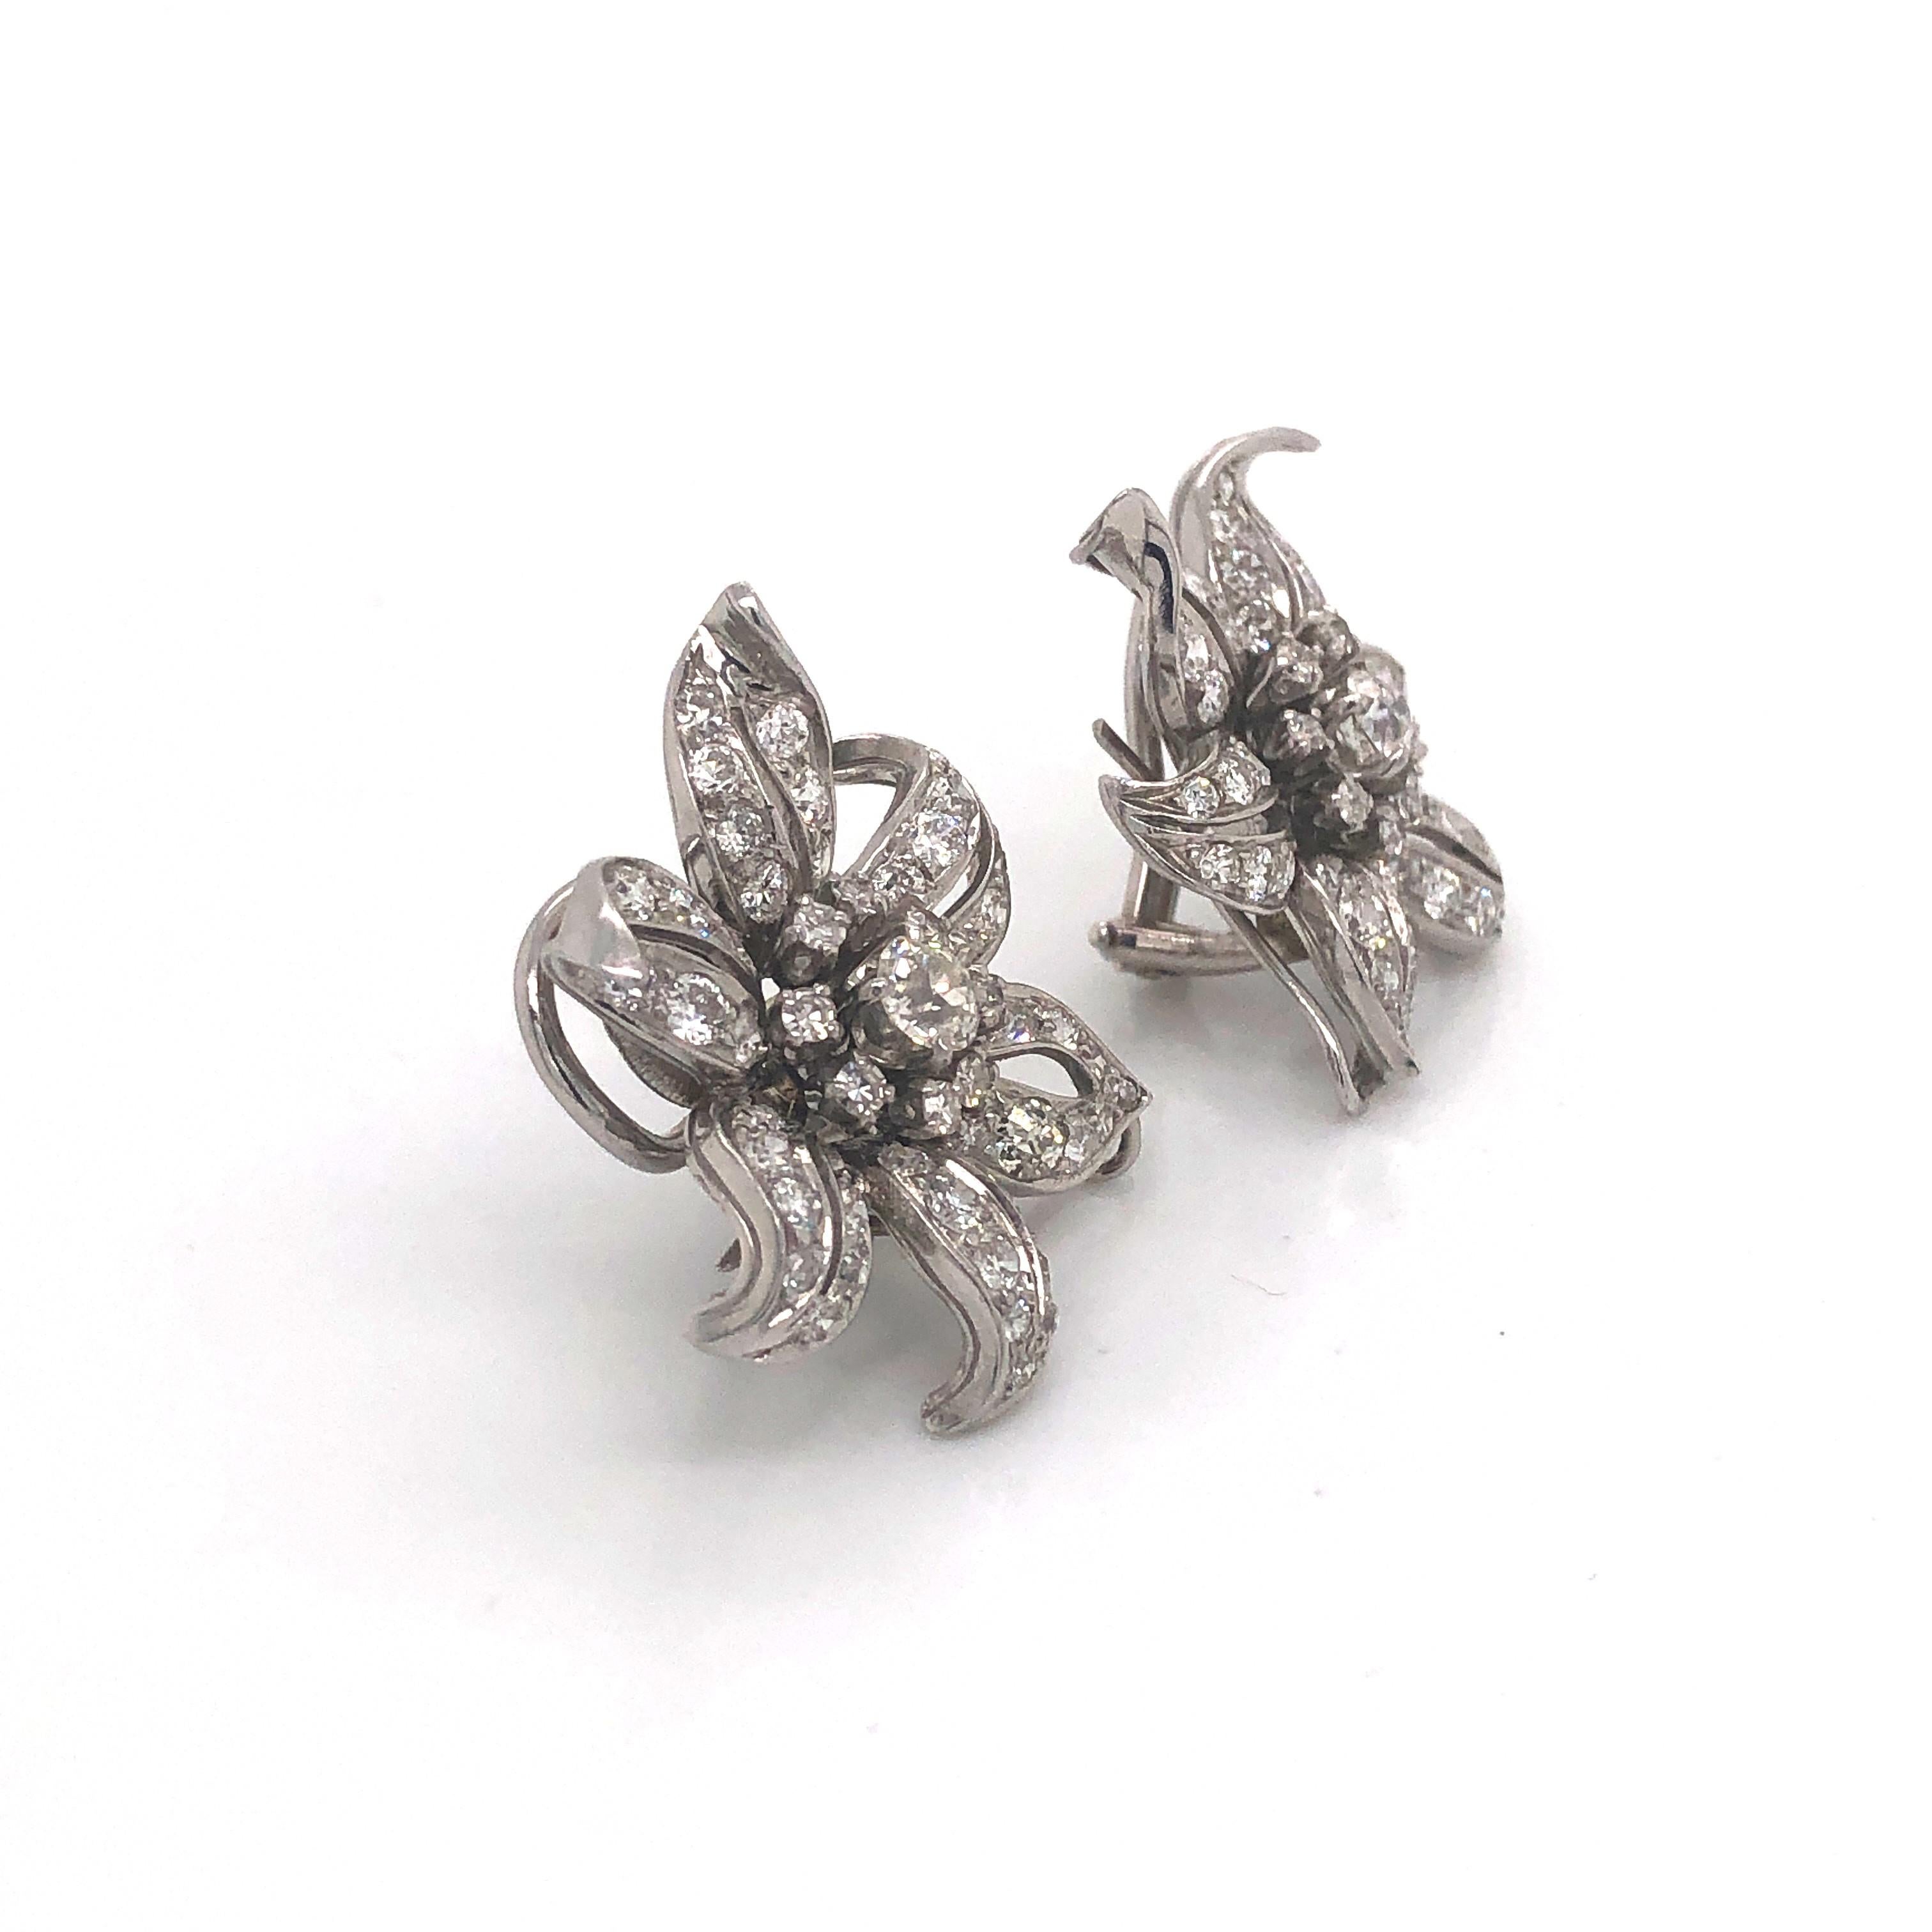 A pair of vintage diamond flower earrings, set with old-cut and eight-cut diamonds, with an estimated total diamond weight of 4.00ct, with clip back fittings, mounted in white gold, circa 1950.